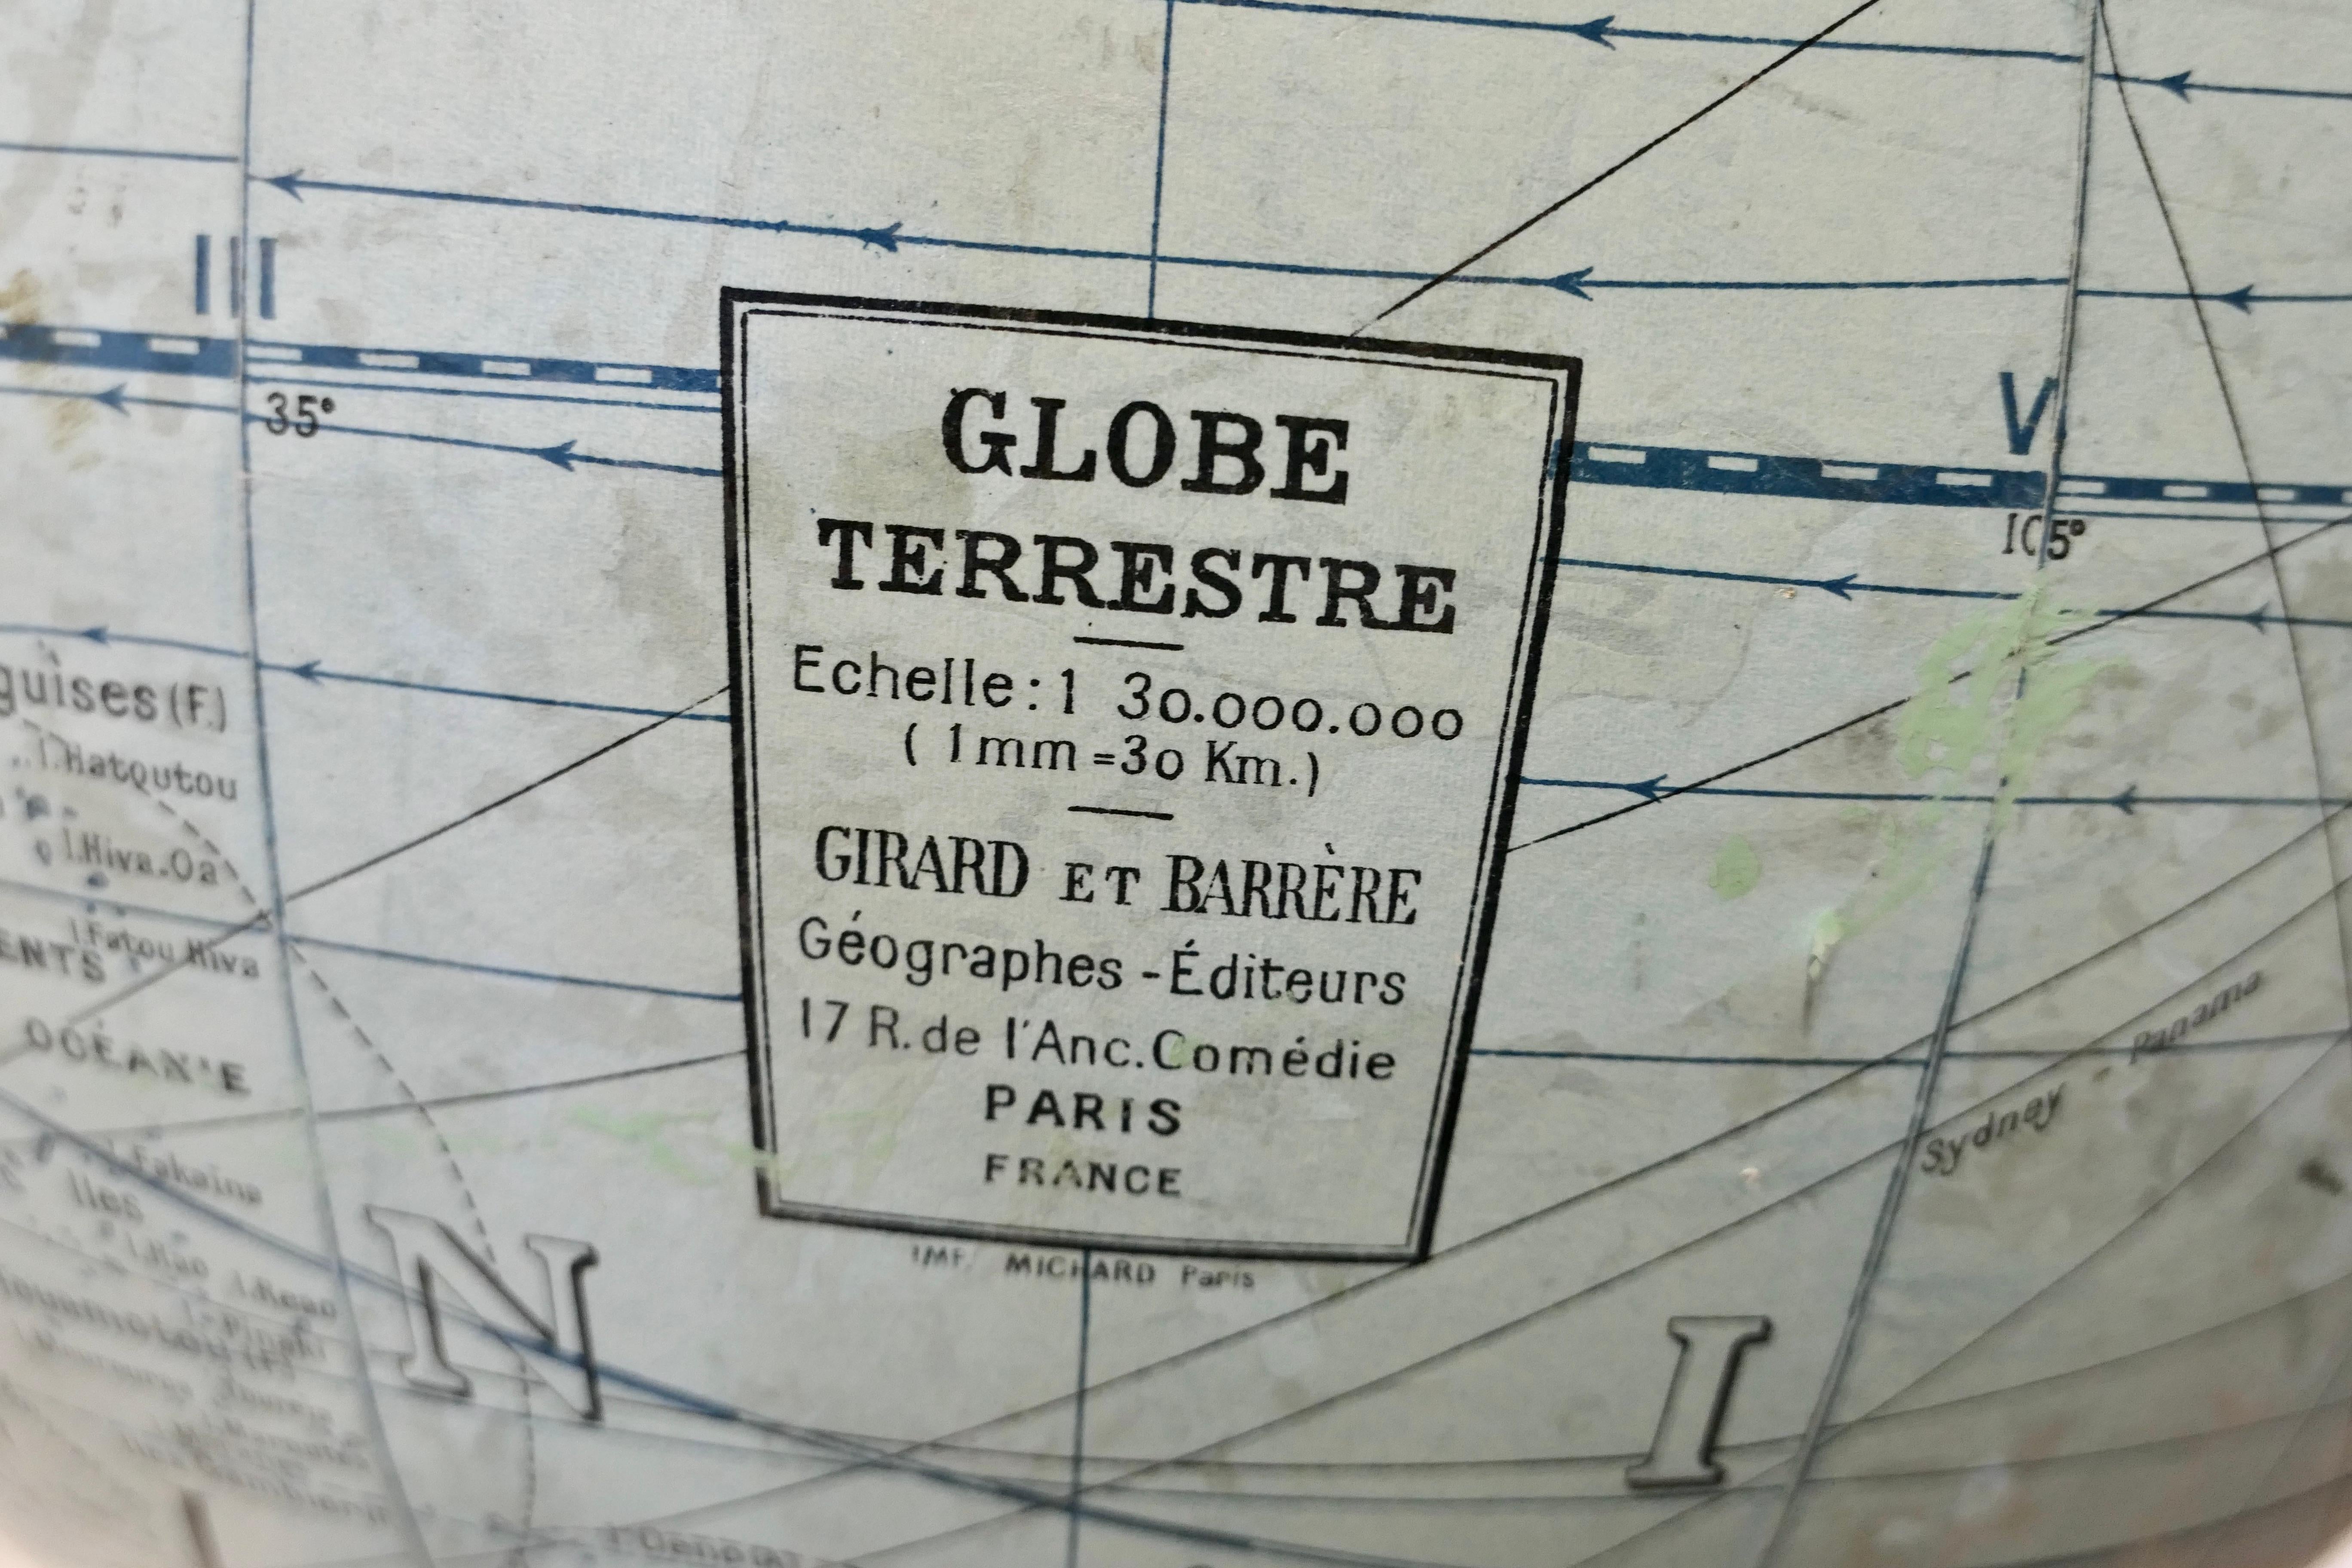 Large French Terrestrial Globe or World Atlas by Girard Et Barrère In Good Condition For Sale In Chillerton, Isle of Wight